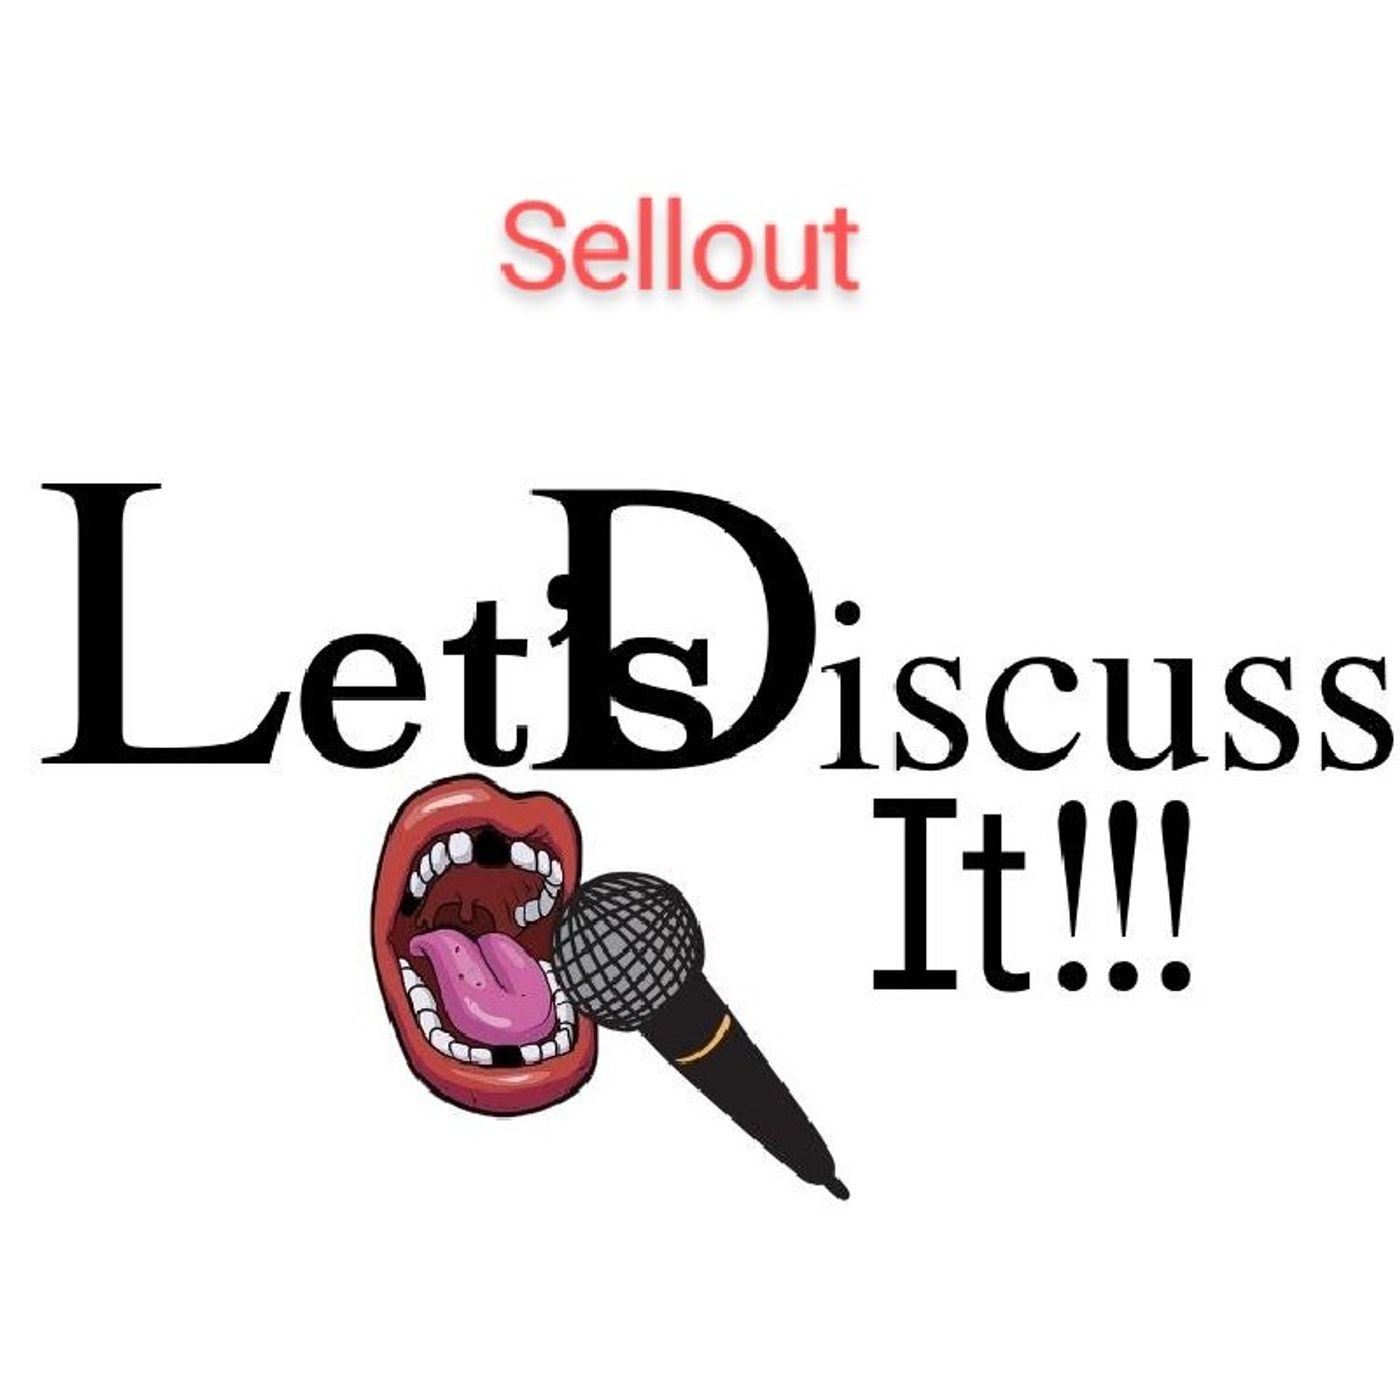 Sellout: Let's Discuss Iit!!!